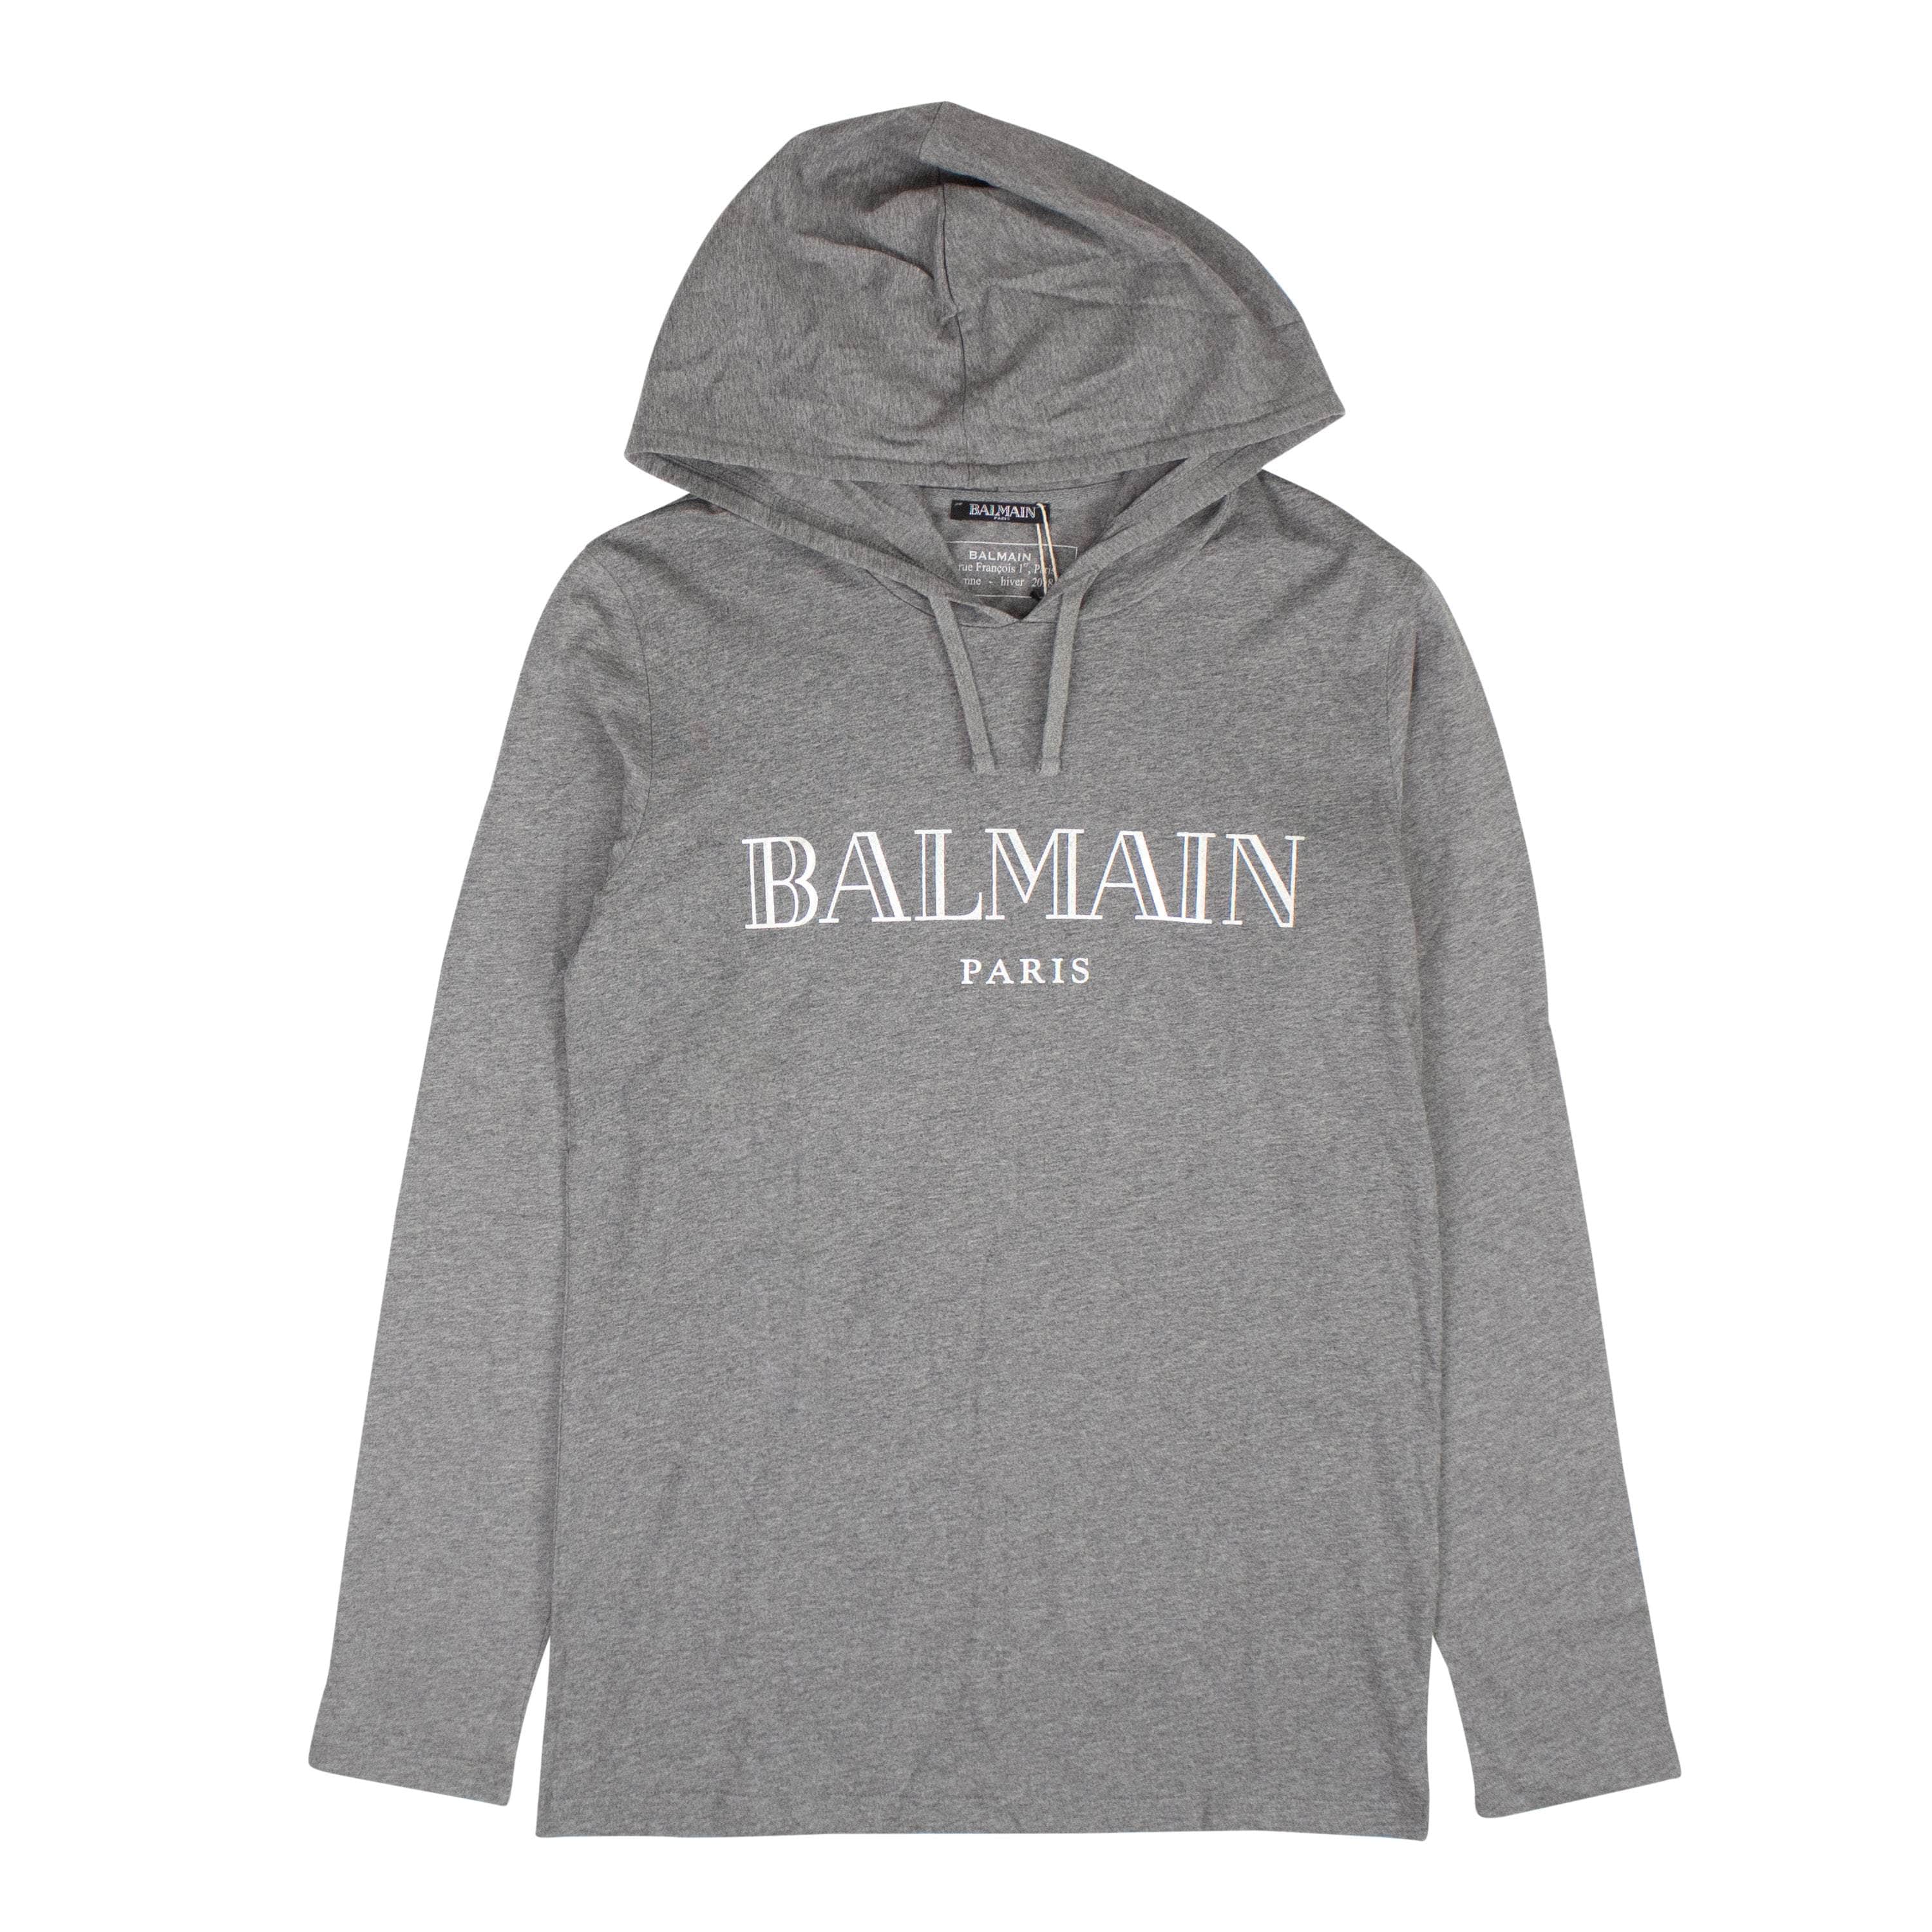 Balmain channelenable-all, chicmi, couponcollection, main-clothing, shop375, Stadium Goods, stadiumgoods, under-250 XS Grey Logo Hoodie BLM-XHDS-0003/XS BLM-XHDS-0003/XS